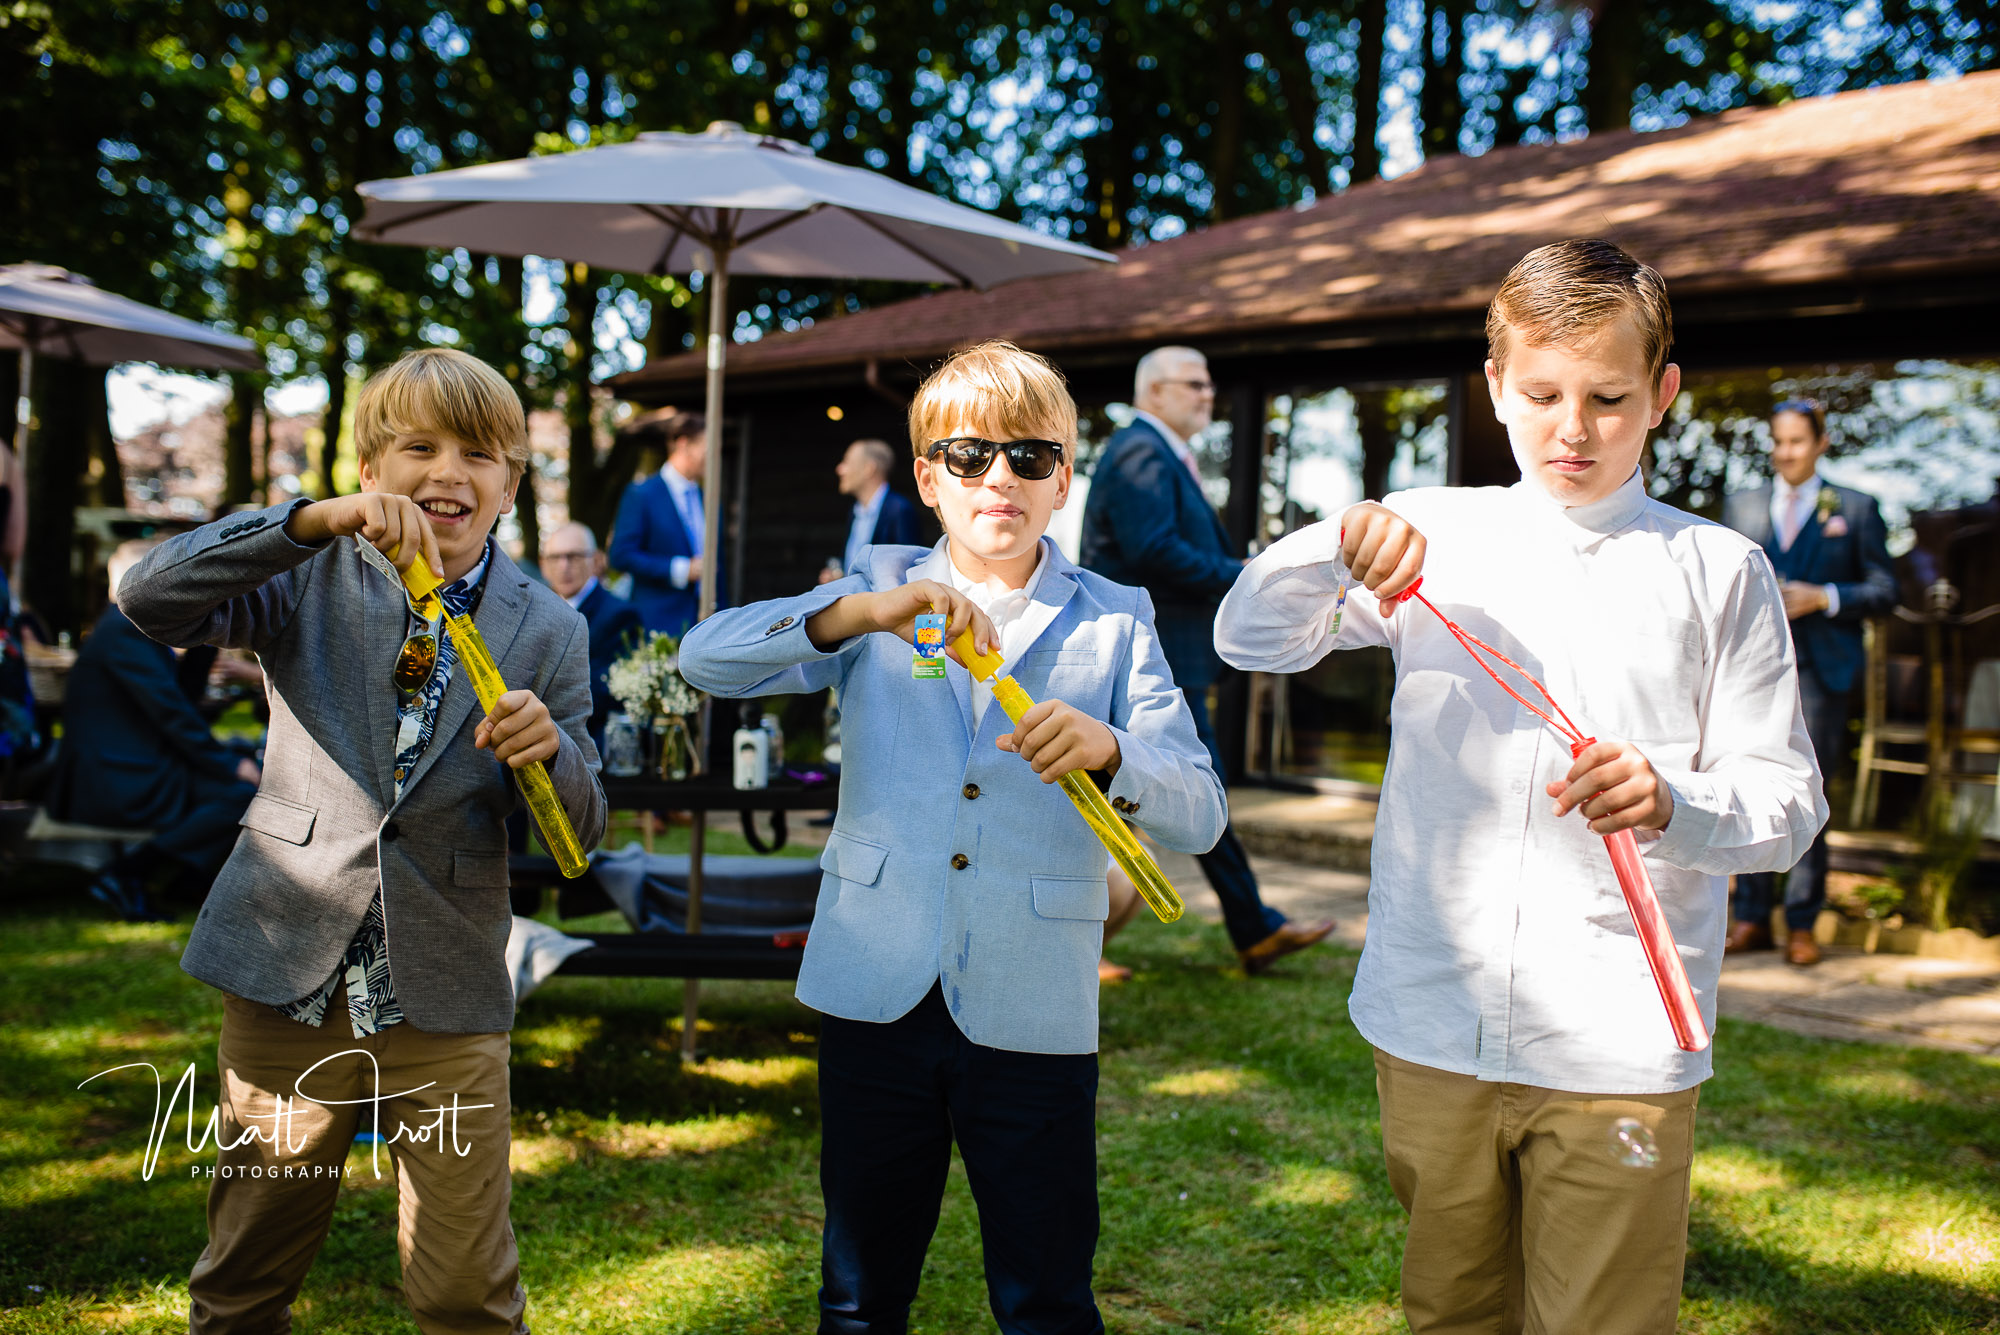 Three young boys blowing bubbles at the camera during a wedding